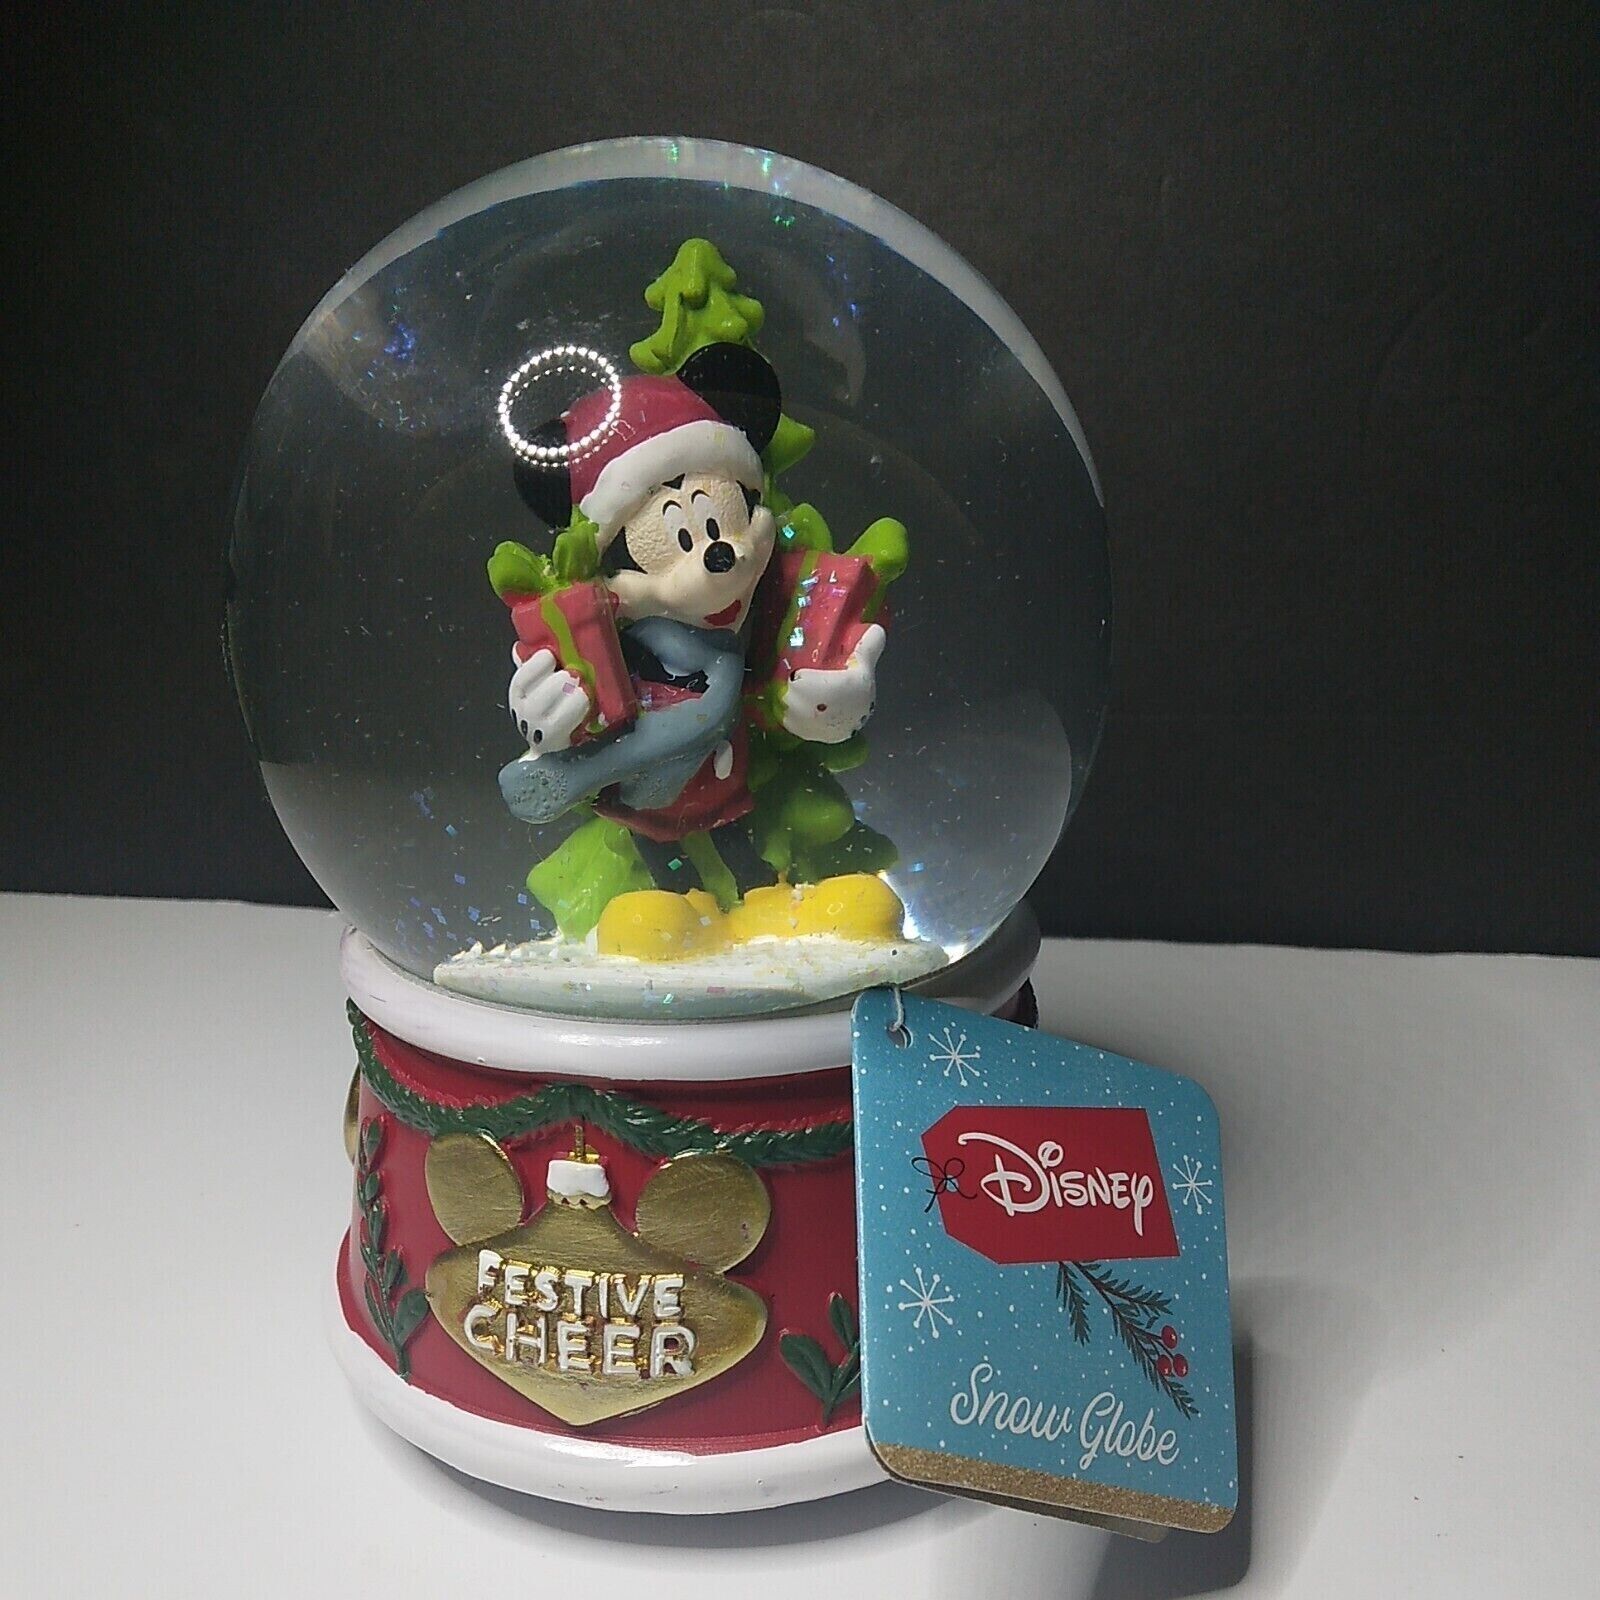 Set of 2 FULL SIZE Mickey Mouse Festive Cheer Musical Snow globes